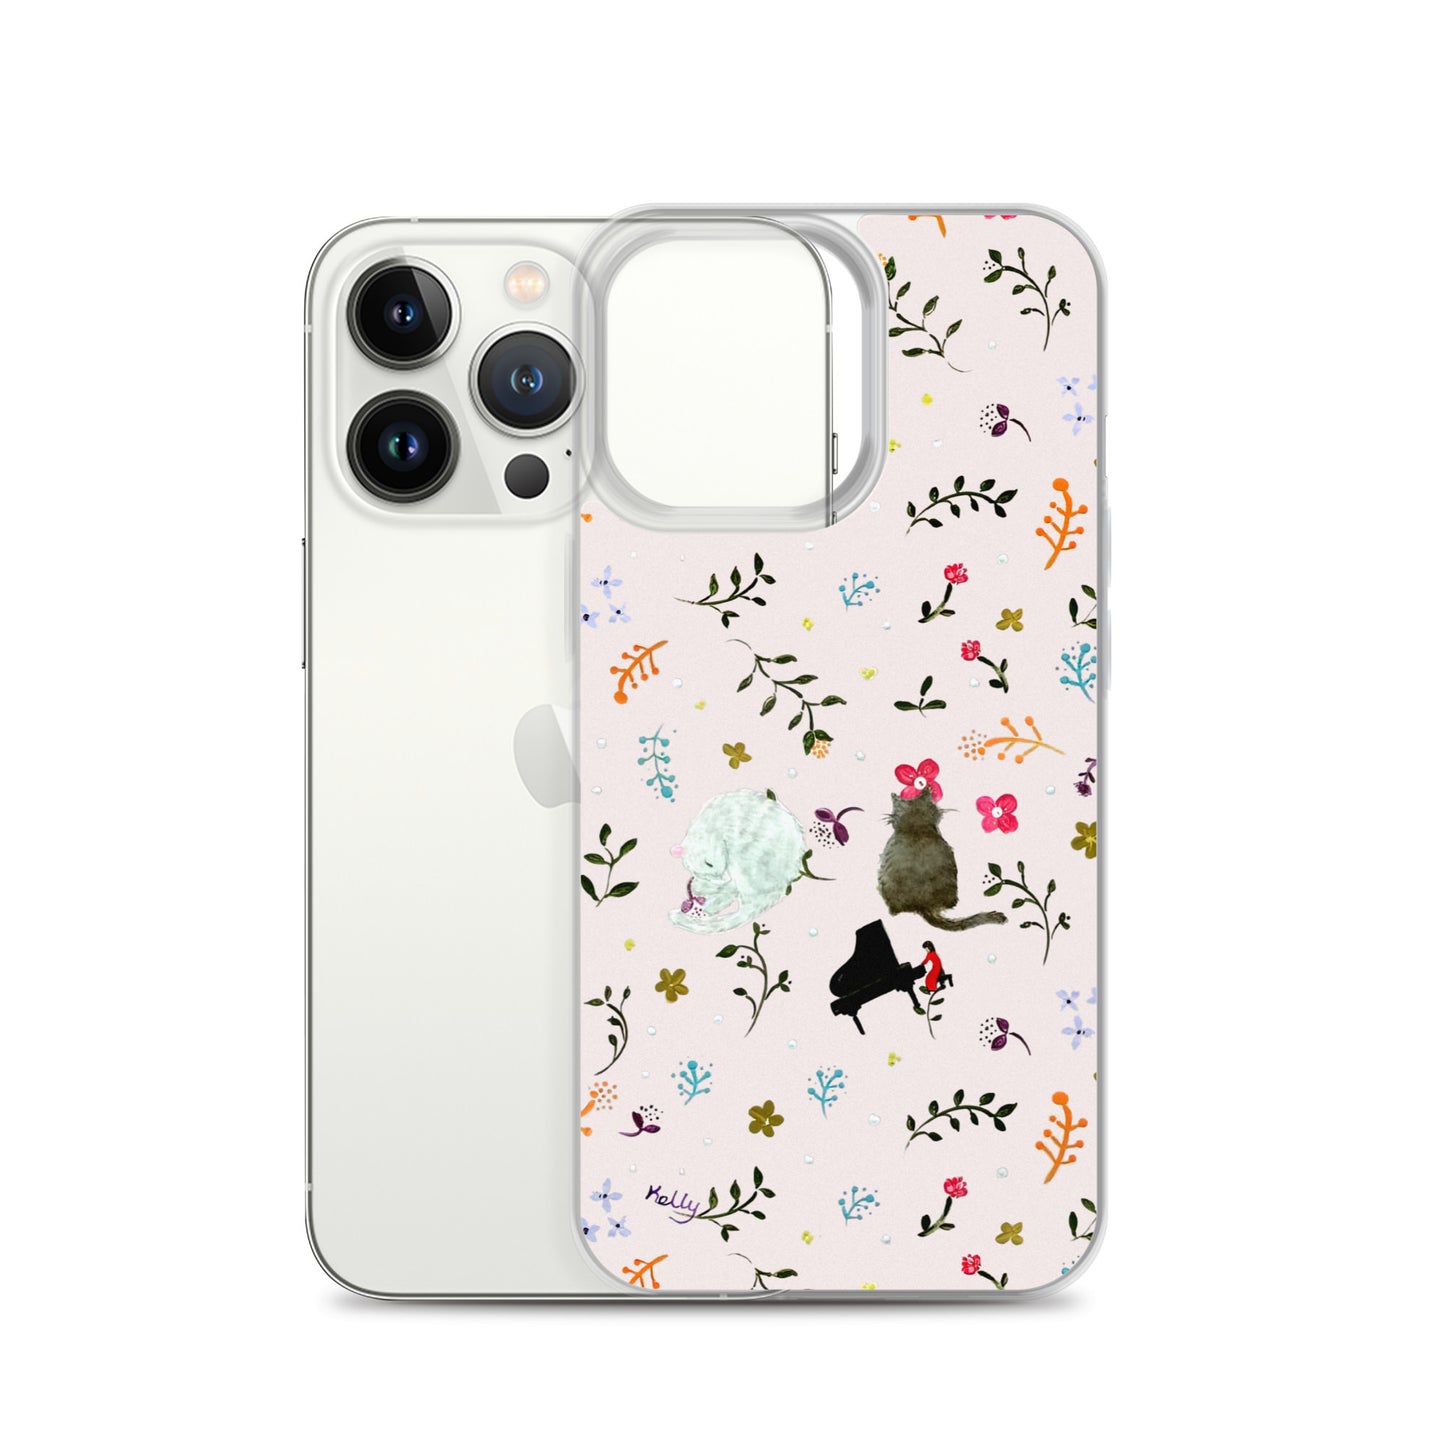 Piano & Cats iPhone Case